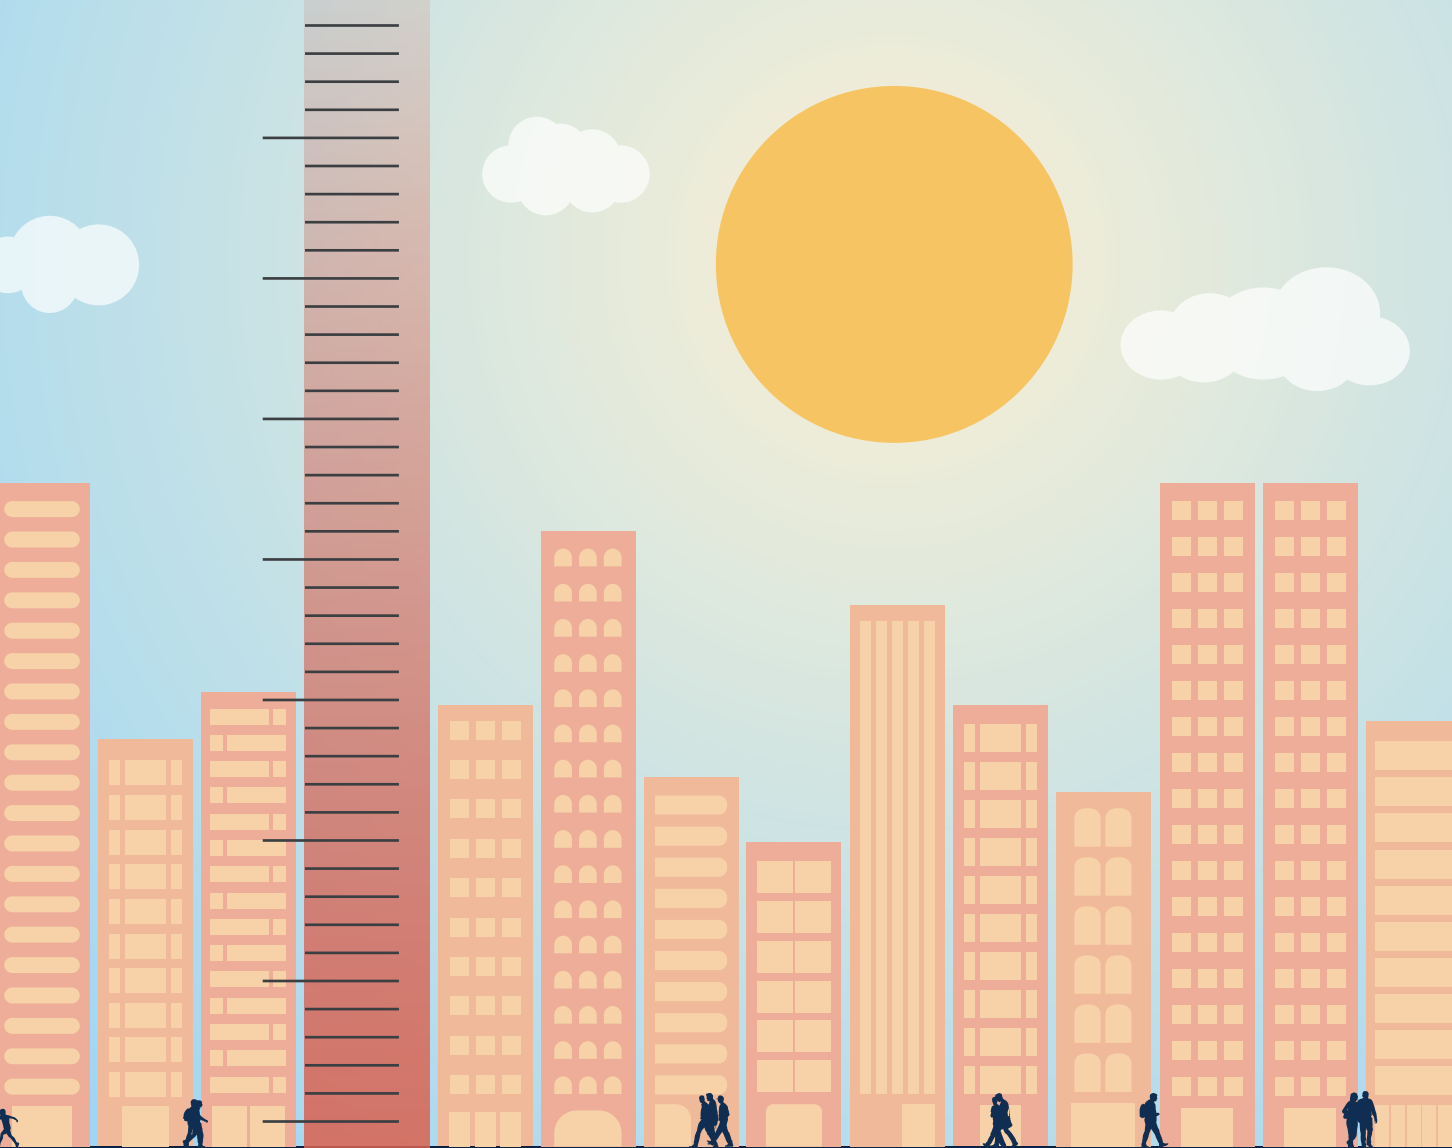 A drawing of skyscrapers next to a thermometer with a yellow sun in the sky